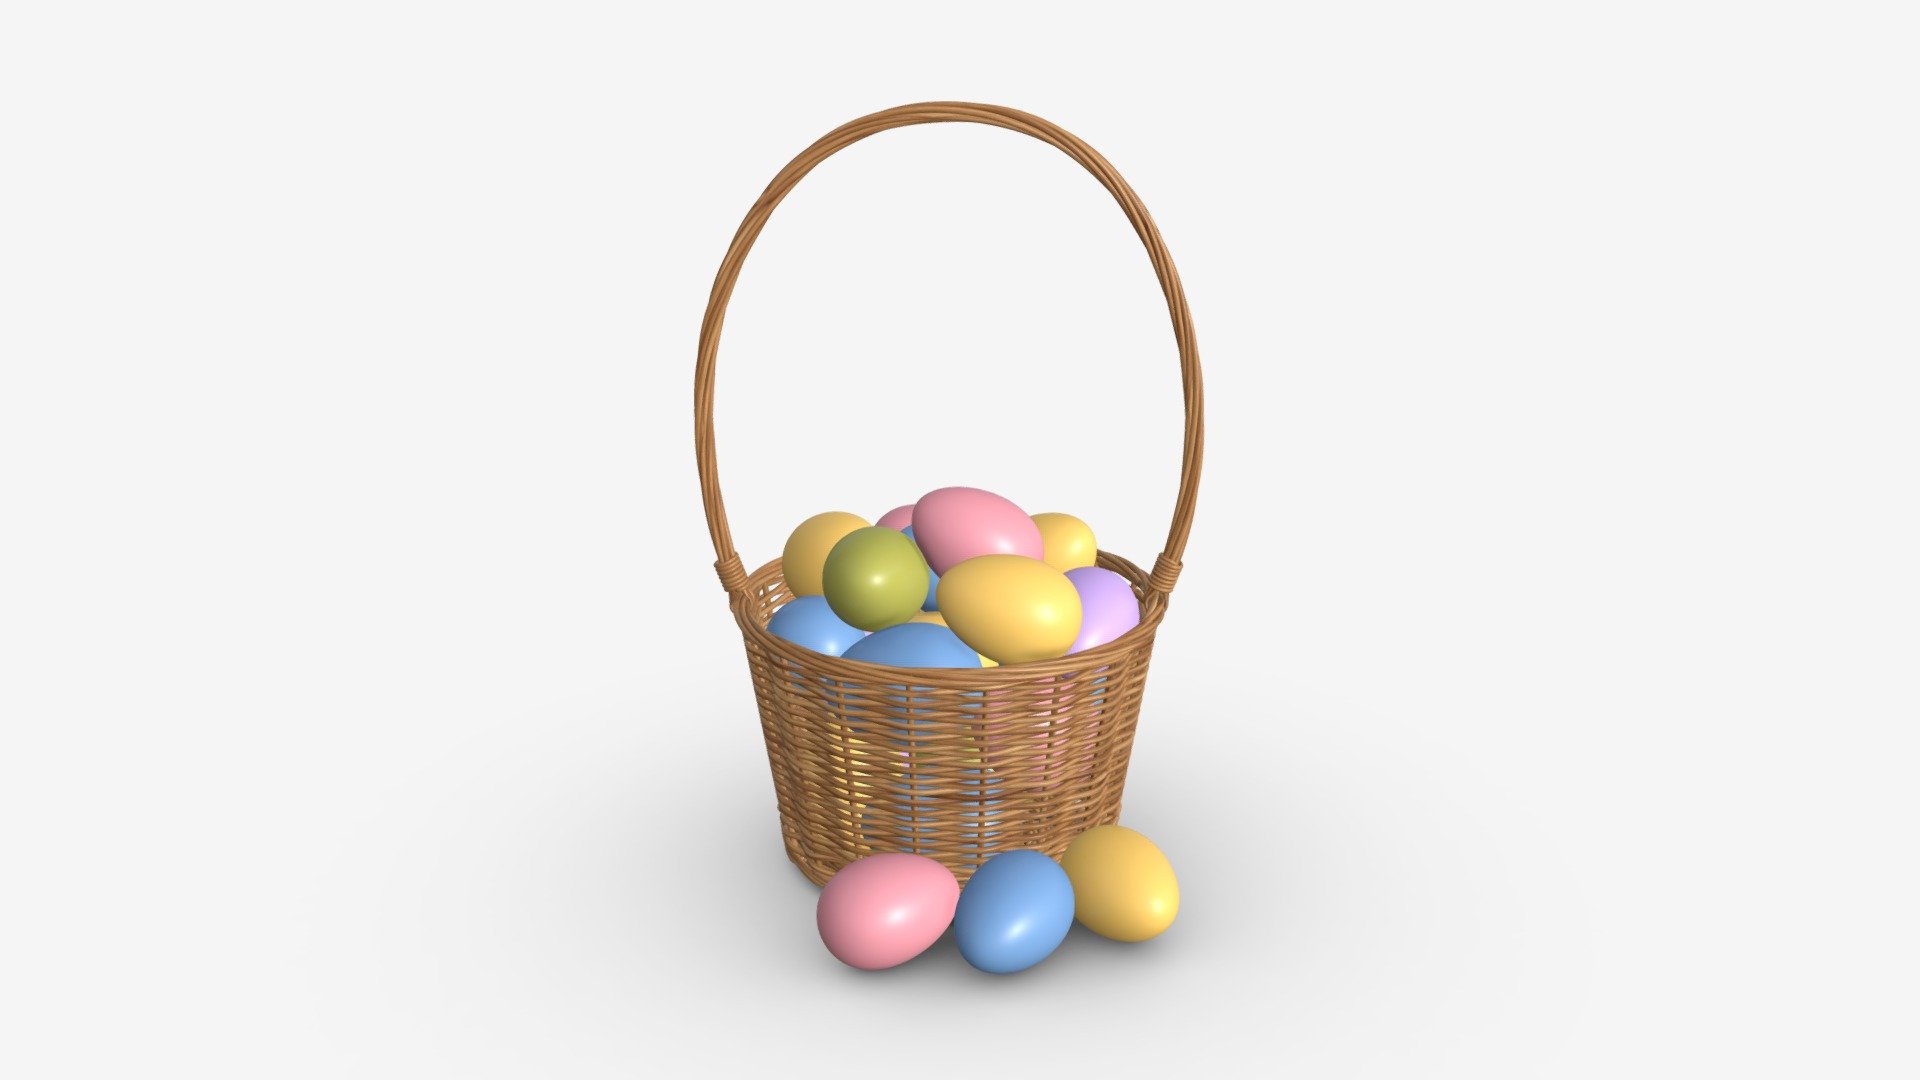 Easter Eggs in Wicker Basket with Handle - Buy Royalty Free 3D model by HQ3DMOD (@AivisAstics) 3d model